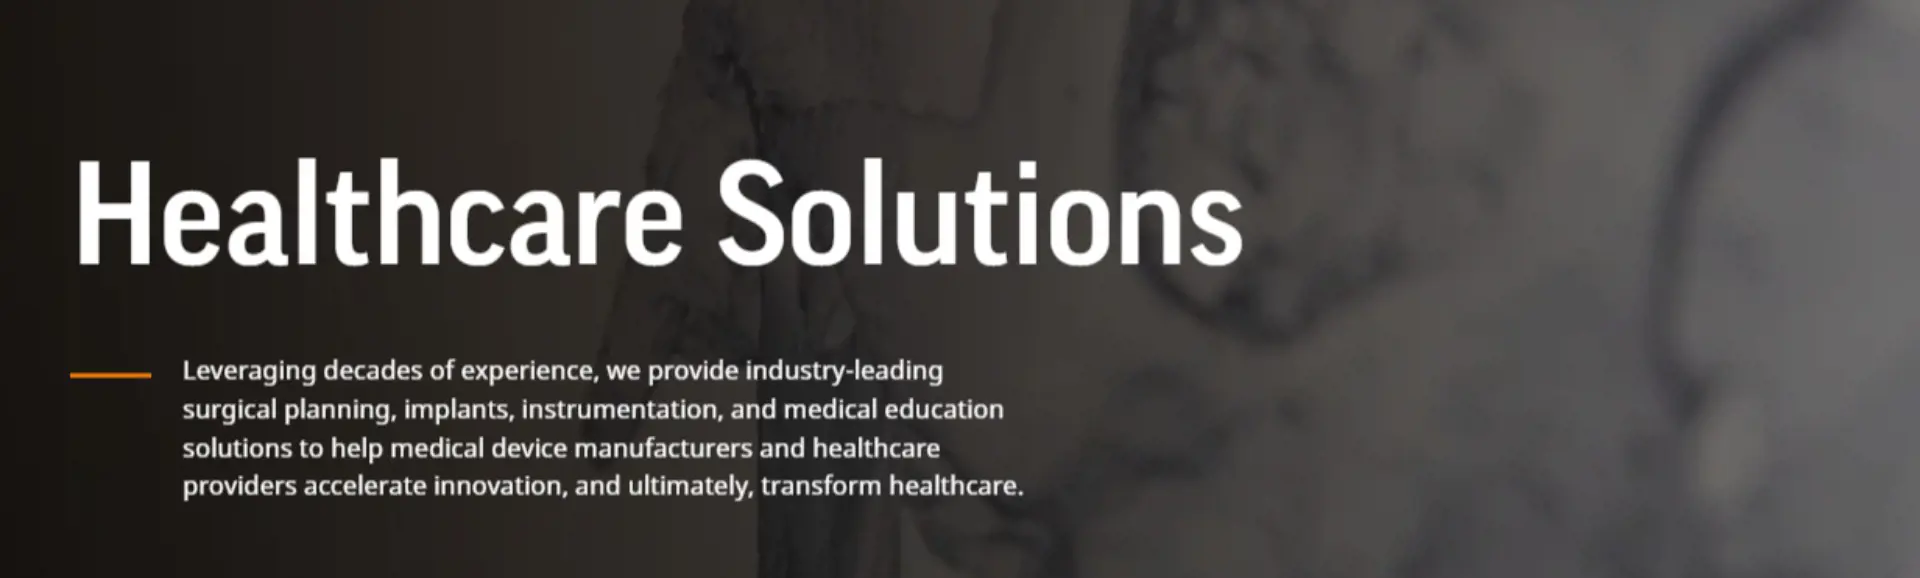 Medical Healthcare Solutions